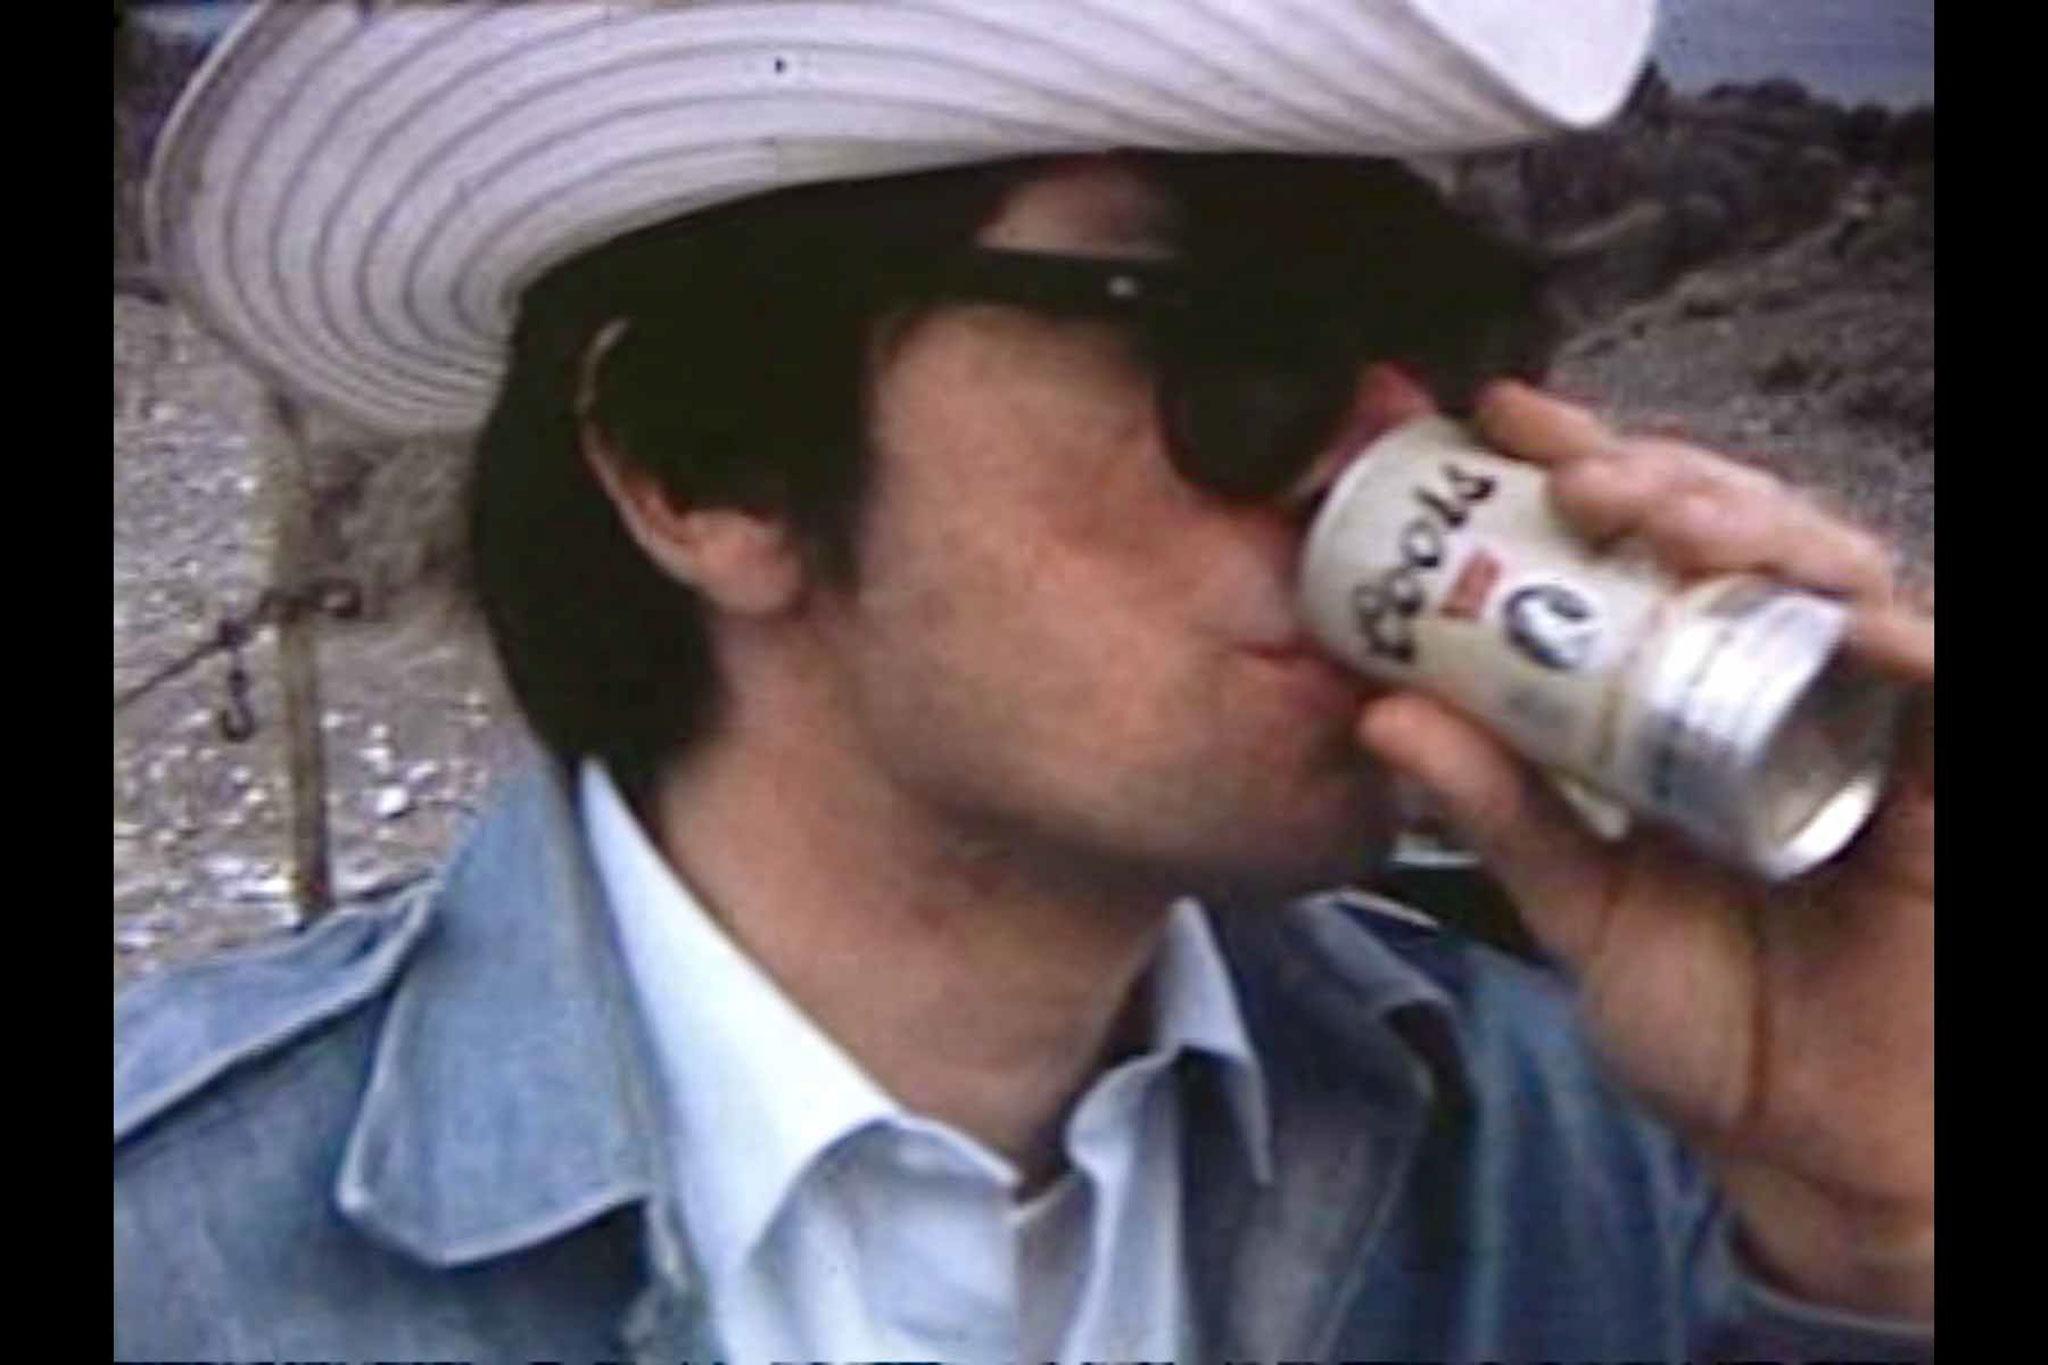 A man wearing a cowboy hat drinking a Coors beer